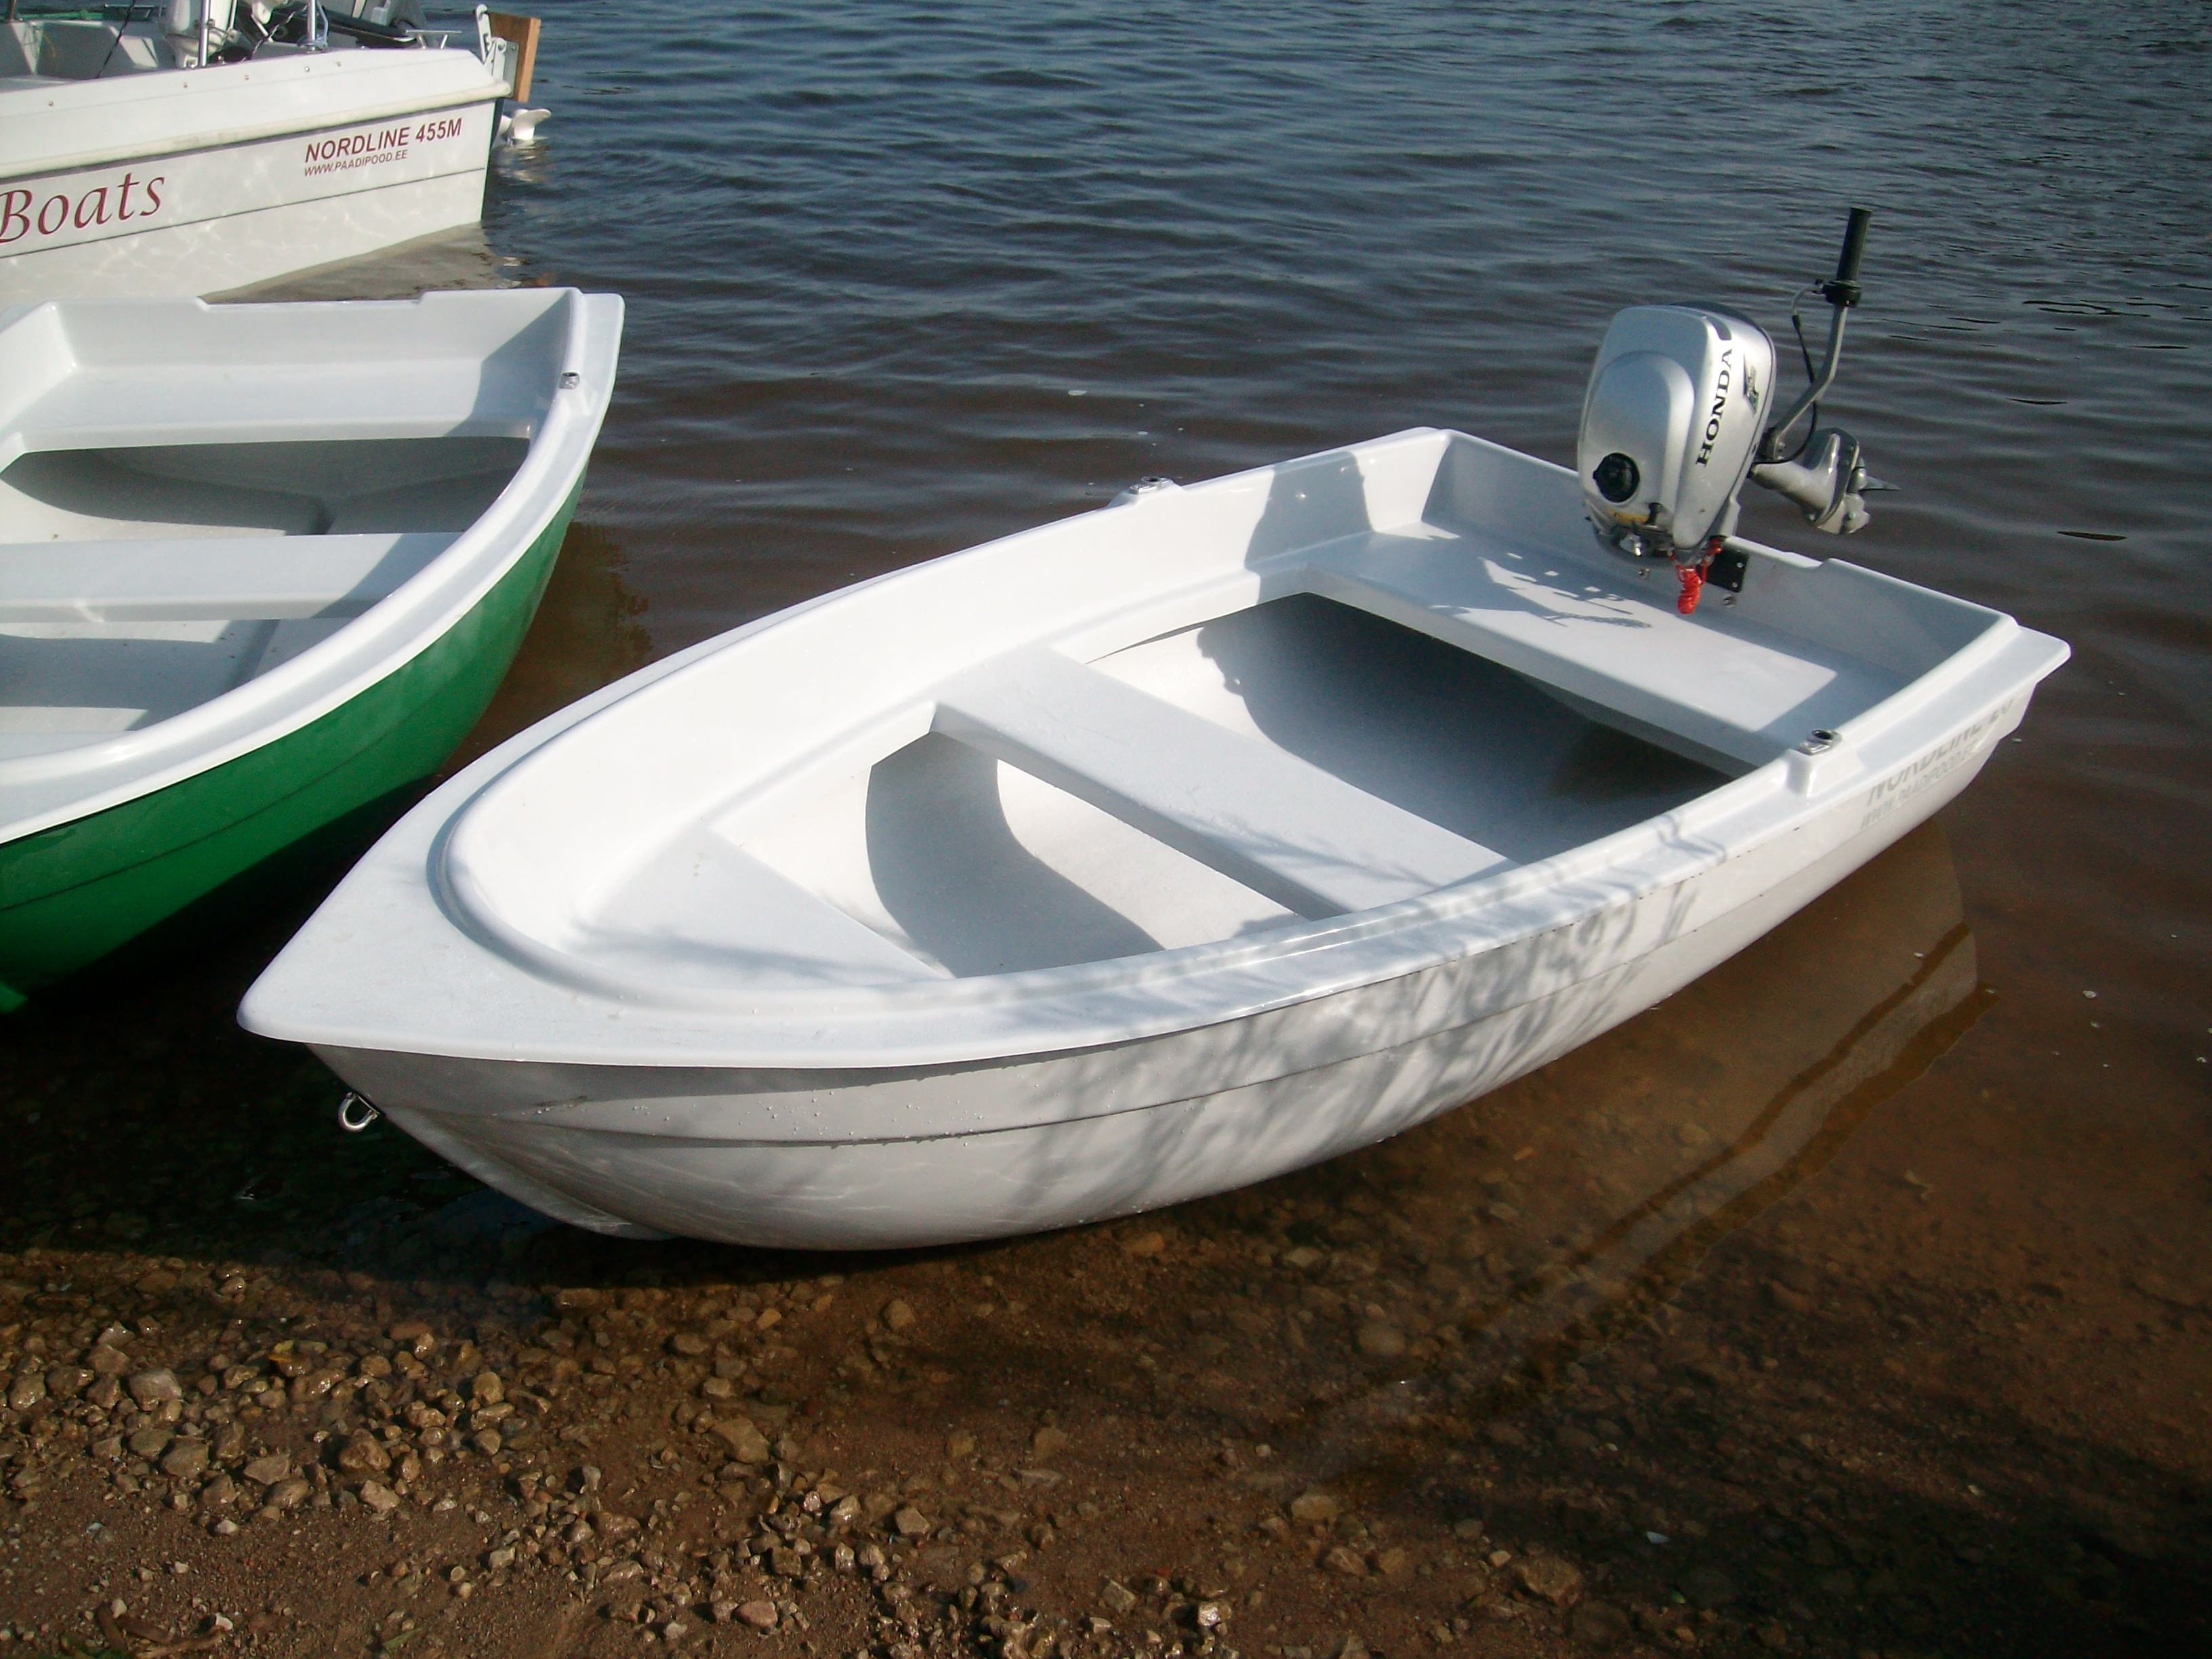 Rowing boat Nordline 25 Small and light fishing boat for